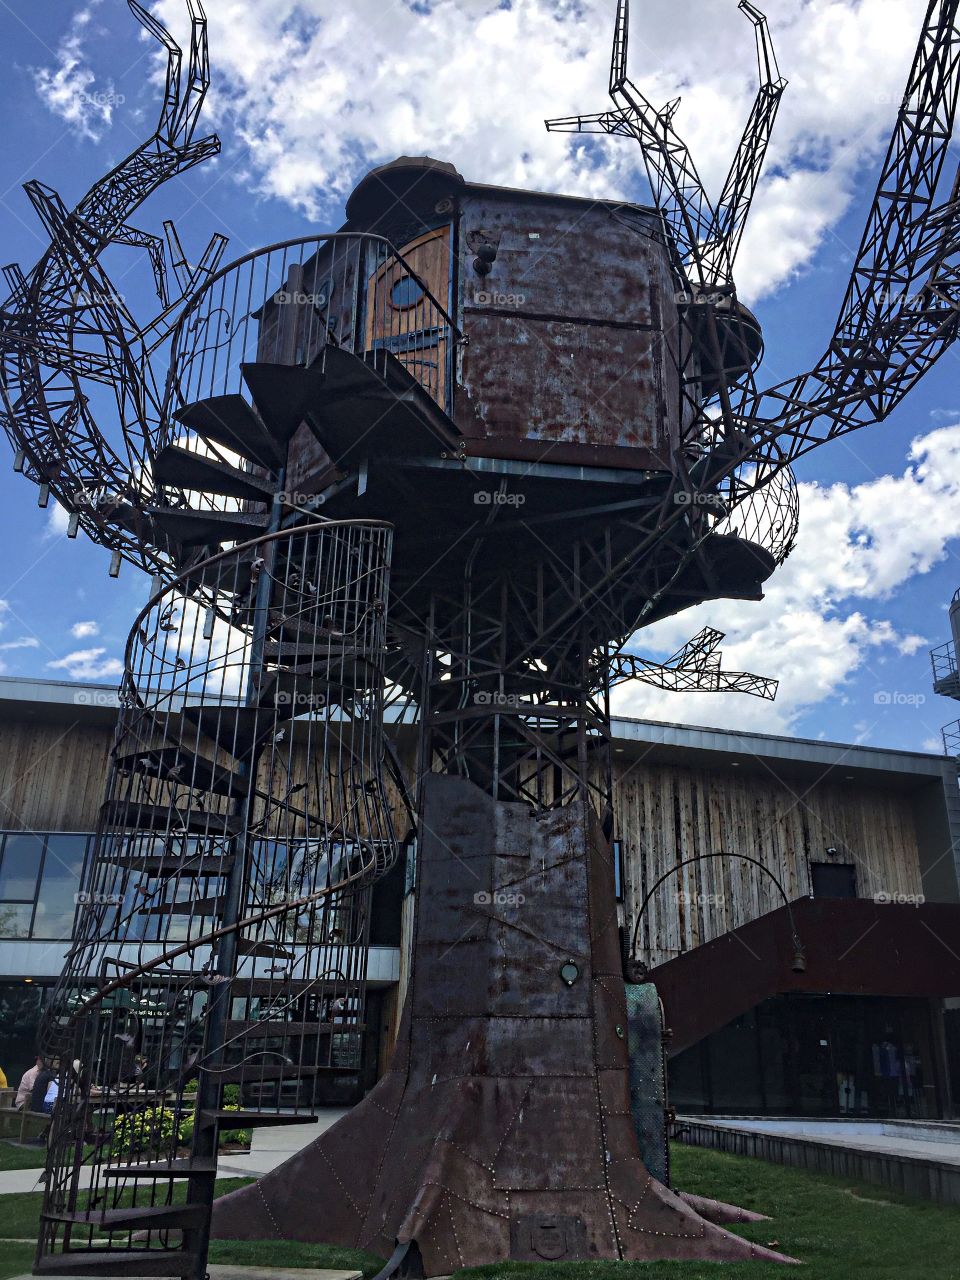 Dogfish Head Brewery Treehouse